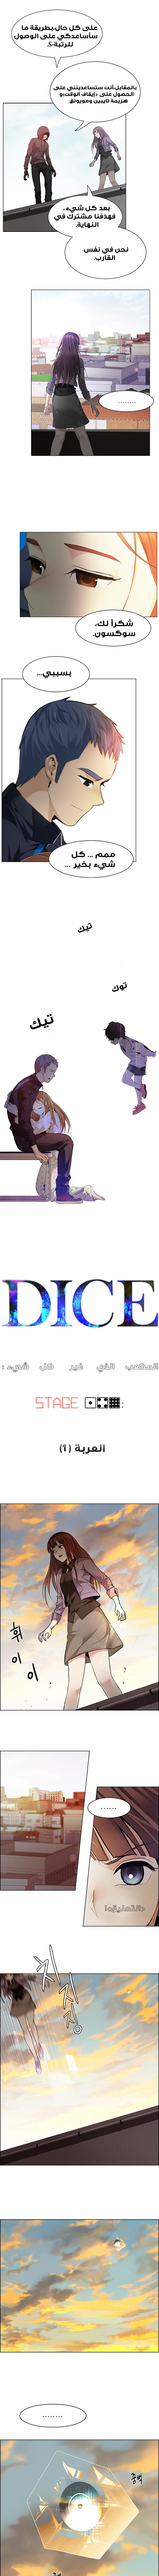 DICE: The Cube that Changes Everything: Chapter 149 - Page 1